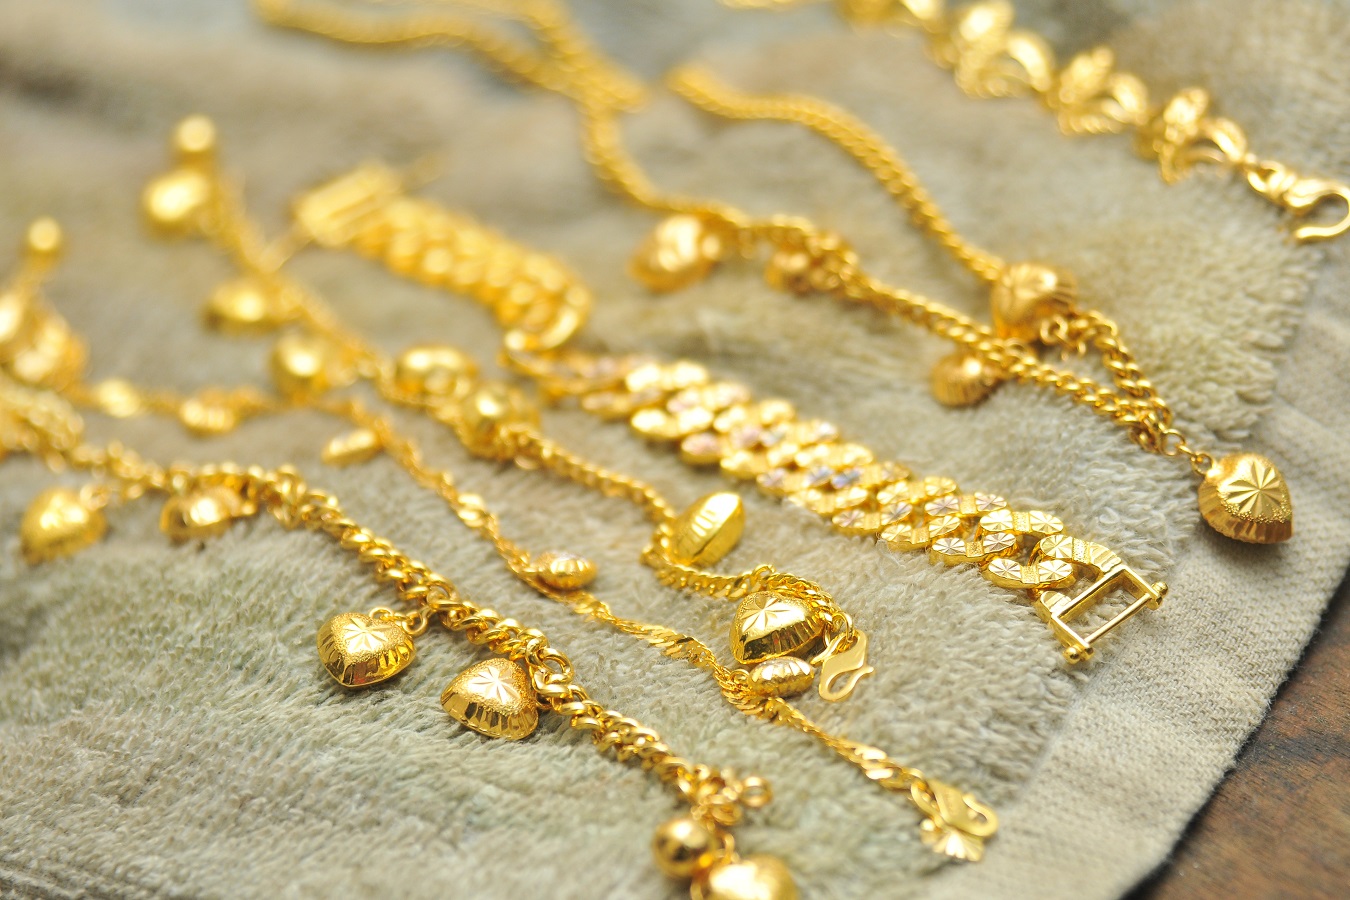 Gold Jewellery: A few interesting facts